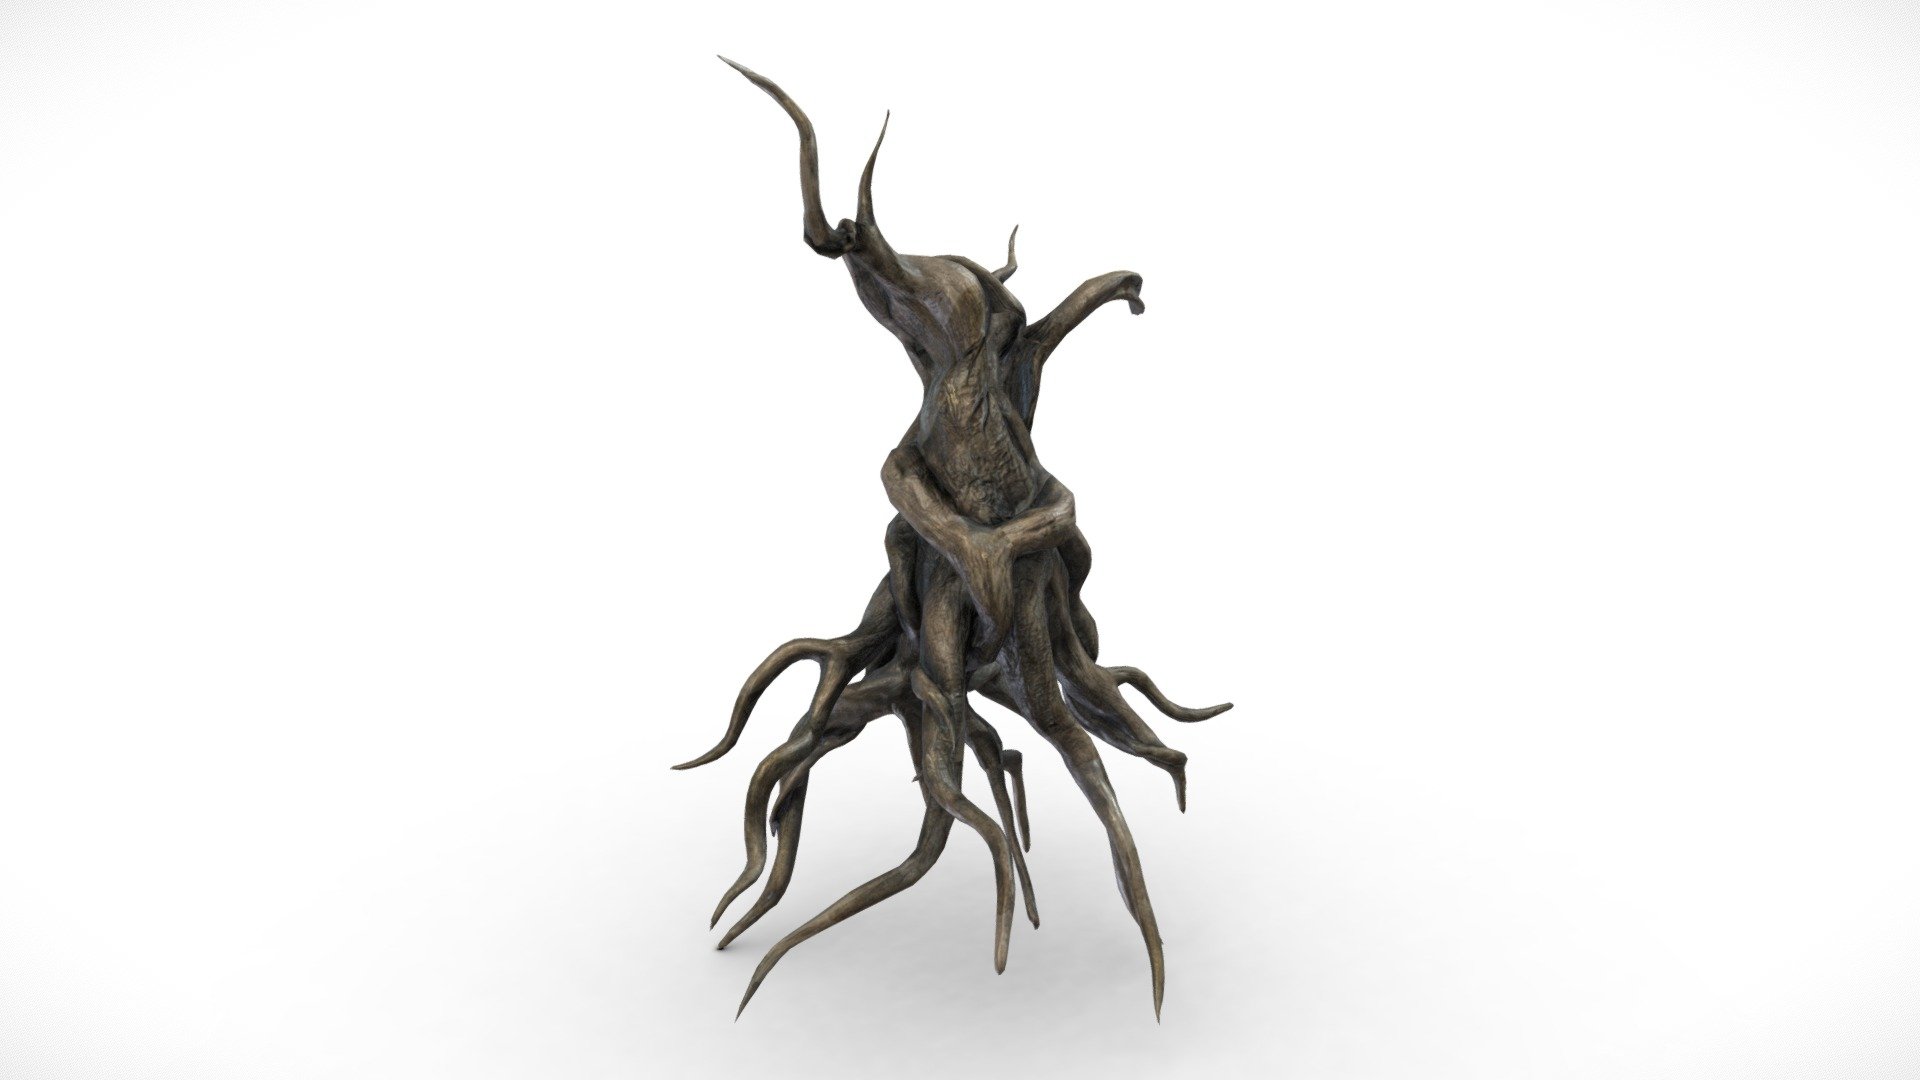 This Tree Mesh is made up of 1 UV Map, with 4096x4096 resolution.
Textures contained are:
- Diffuse
- Metallic
- Normal
- Roughness - Fantasy Forest Tree Stump B - Scary Dead Roots - Buy Royalty Free 3D model by Davis3D 3d model